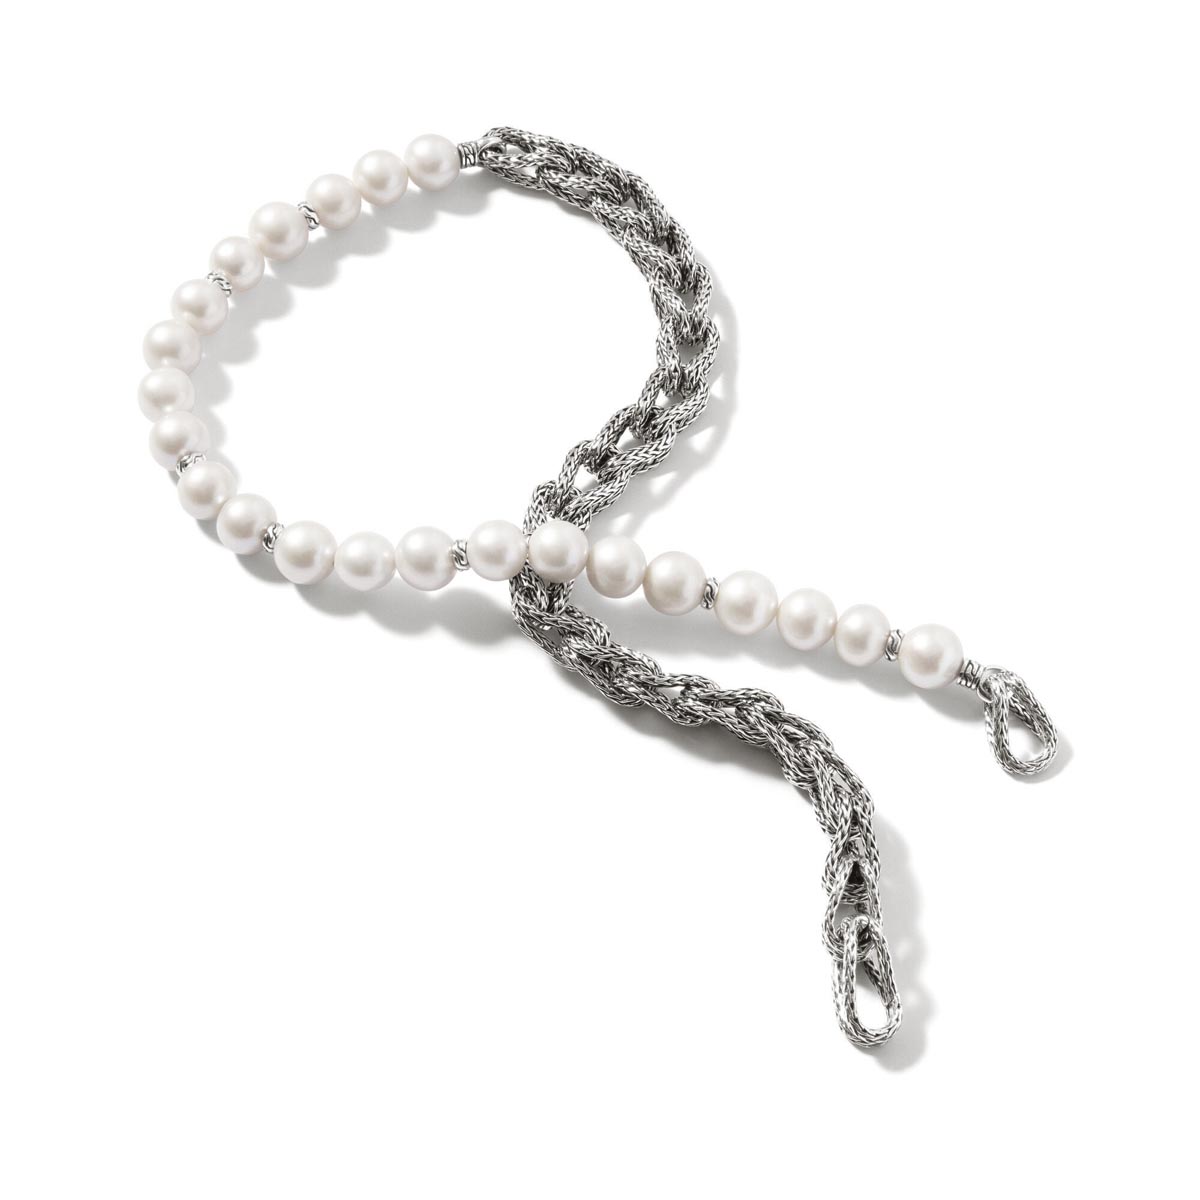 John Hardy Classic Chain Collection Asli Cultured Freshwater Pearl Necklace in Sterling Silver (9.5mm pearls)